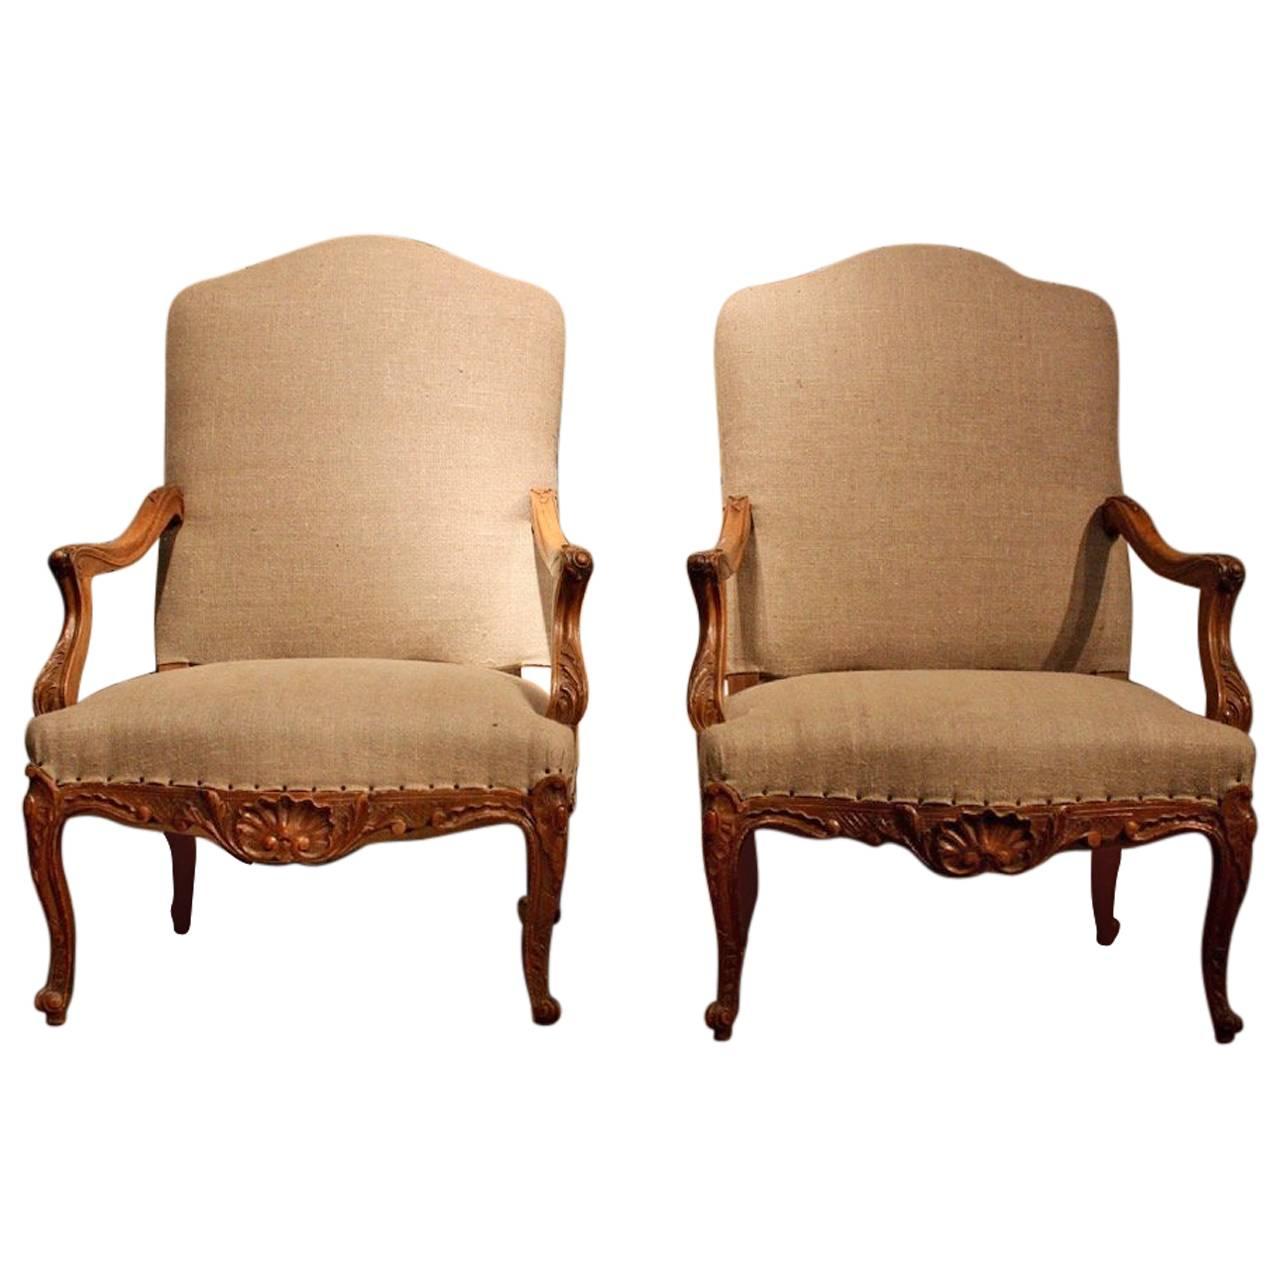 Pair of French Walnut Armchairs, circa 1900